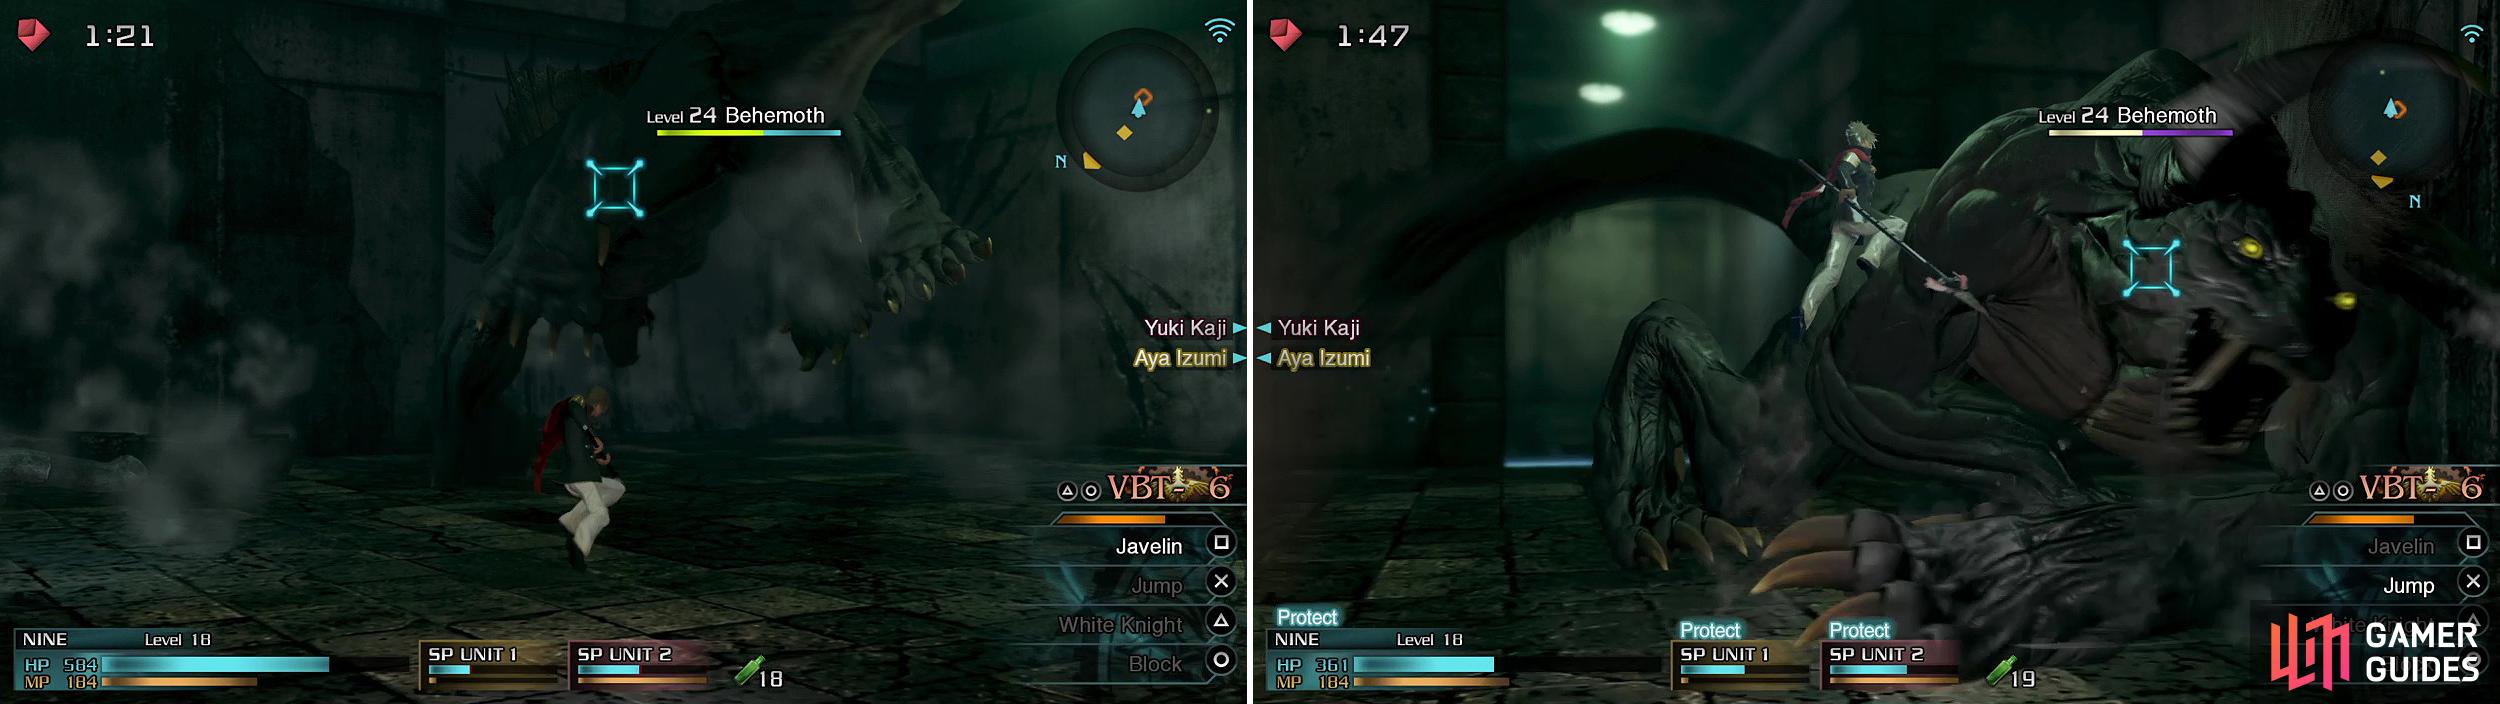 The Behemoth can do a 360 spin (left) to send you all flying. After an attack, you will always get a breaksight opportunity. Jump is excellent if timed correctly (right).